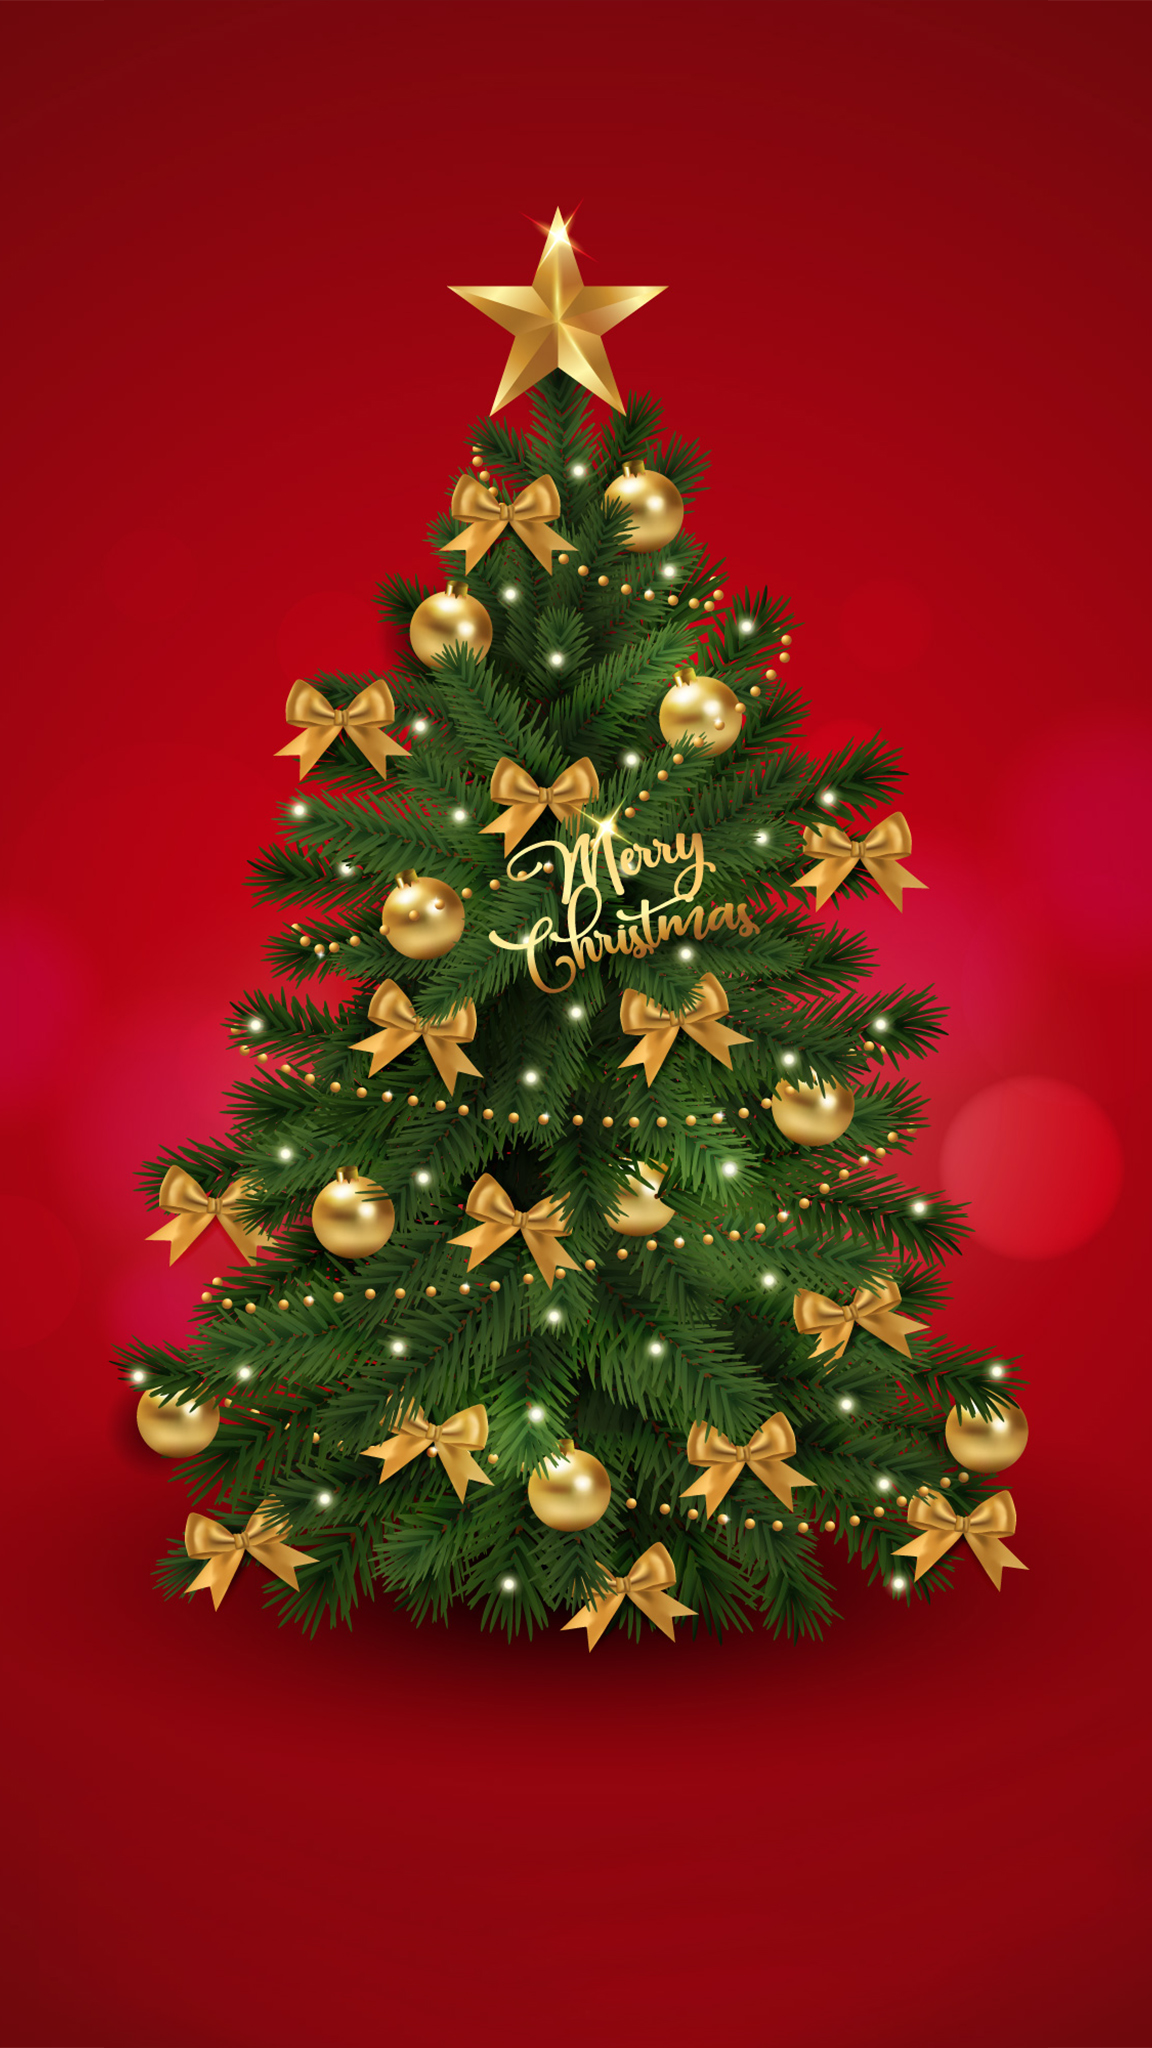 Wallpaper Merry Christmas decoration hazy 7680x4320 UHD 8K Picture Image